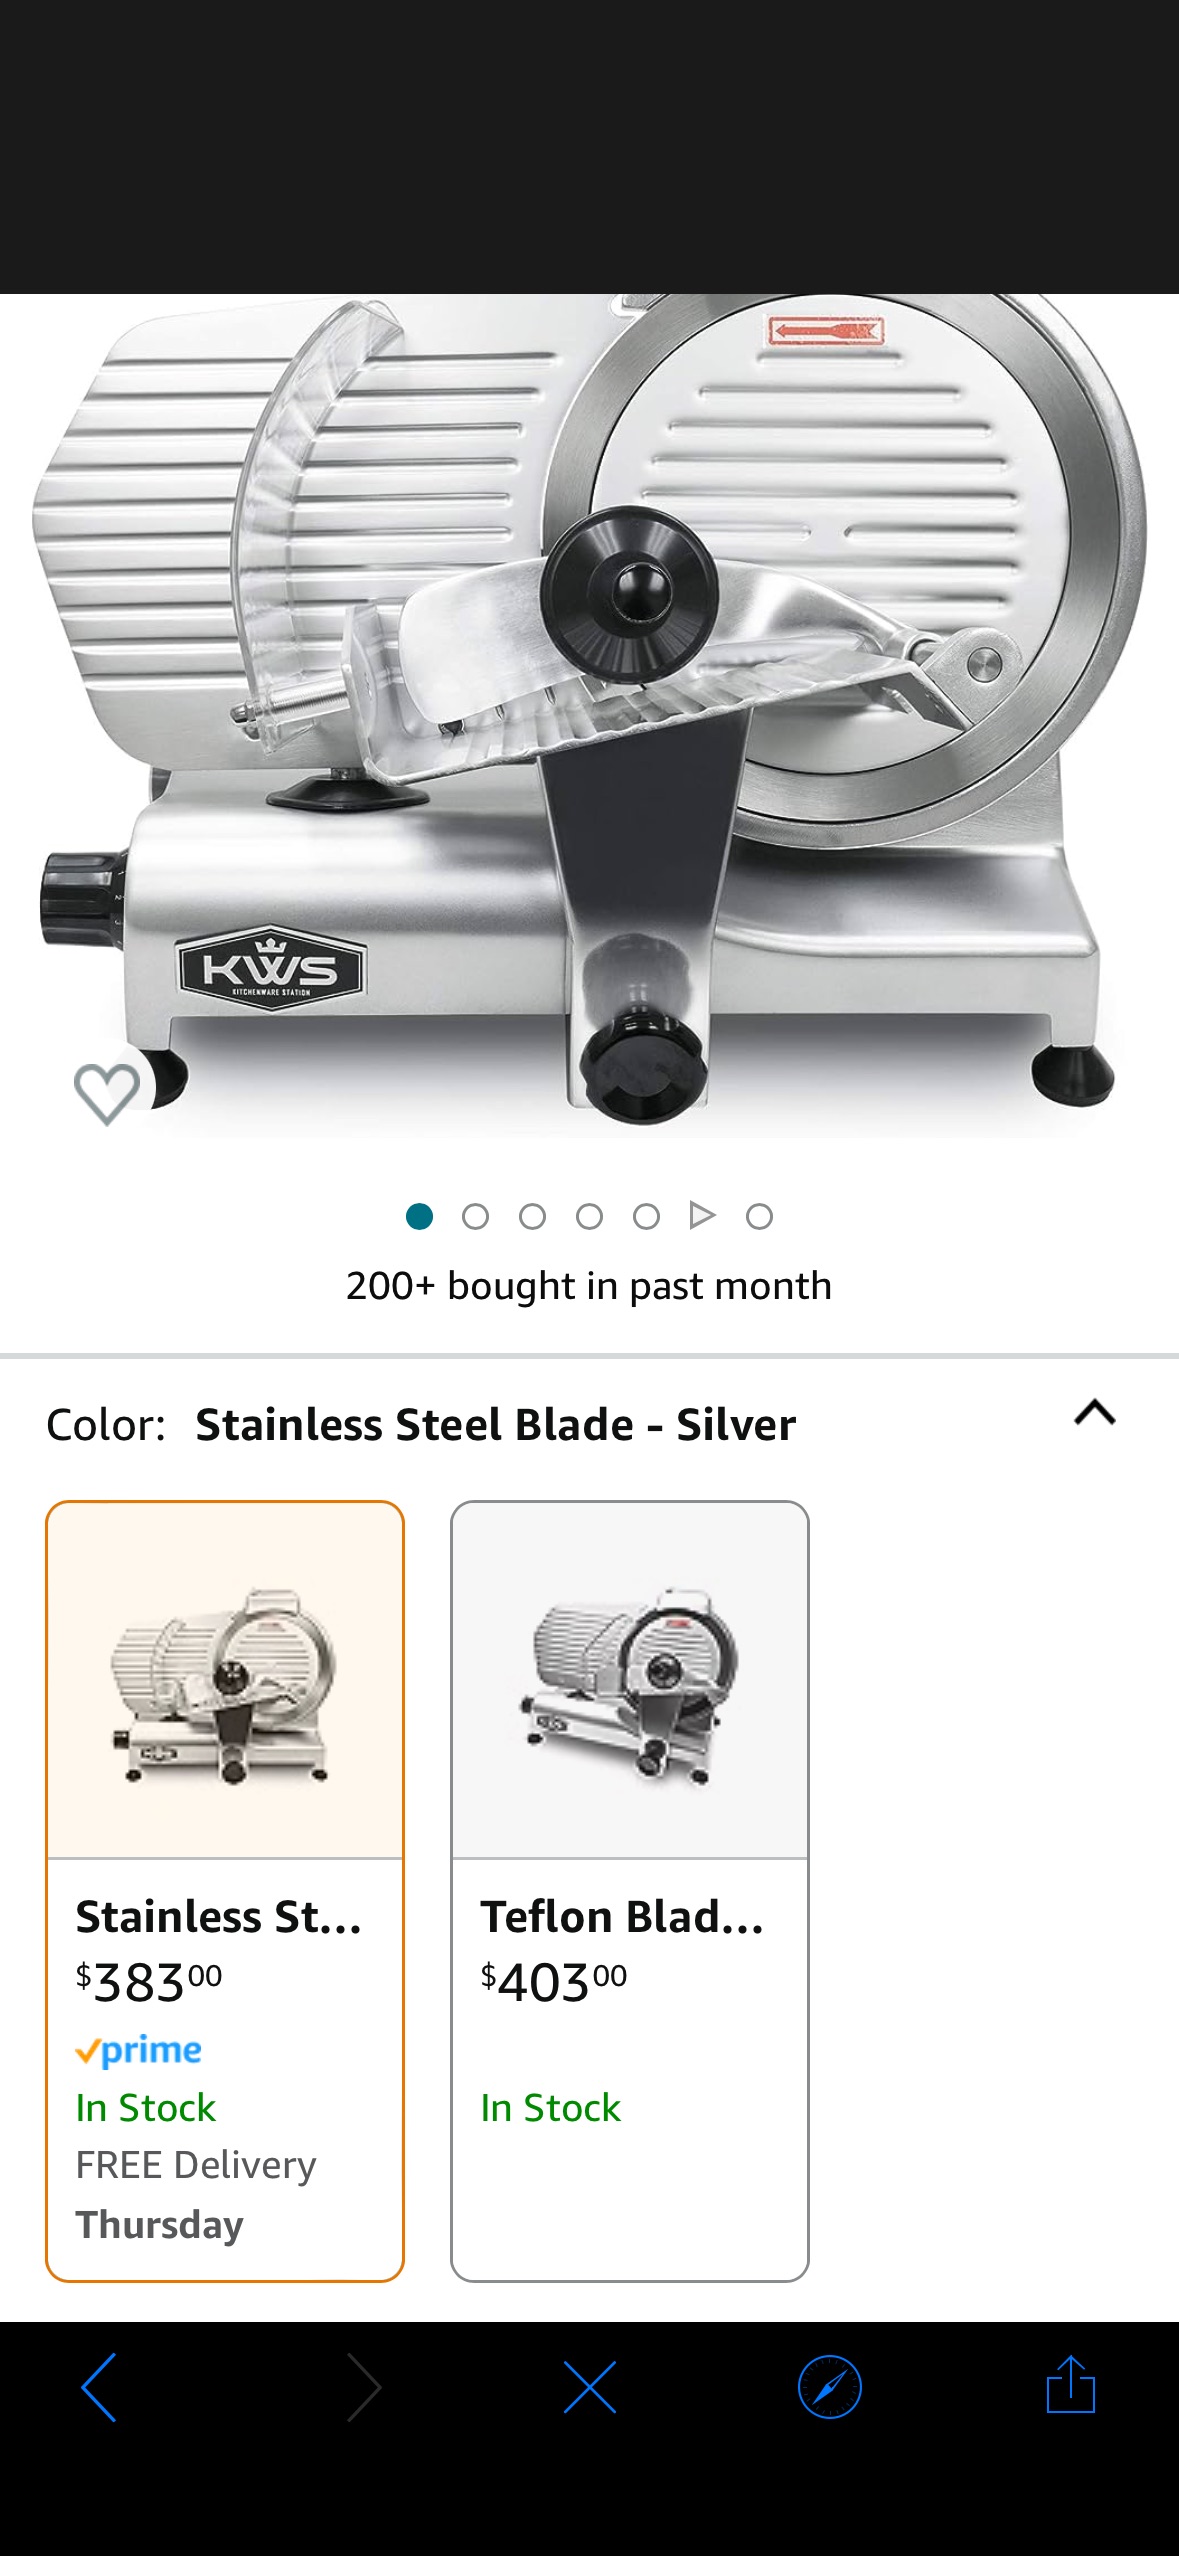 Amazon.com: KWS Commercial 320W Electric Meat Slicer 10" Frozen Meat Deli Slicer Coffee Shop/restaurant and Home Use Low Noises [ ETL, NSF Certified ] (Stainless Steel Blade - Silver): Home & Kitchen